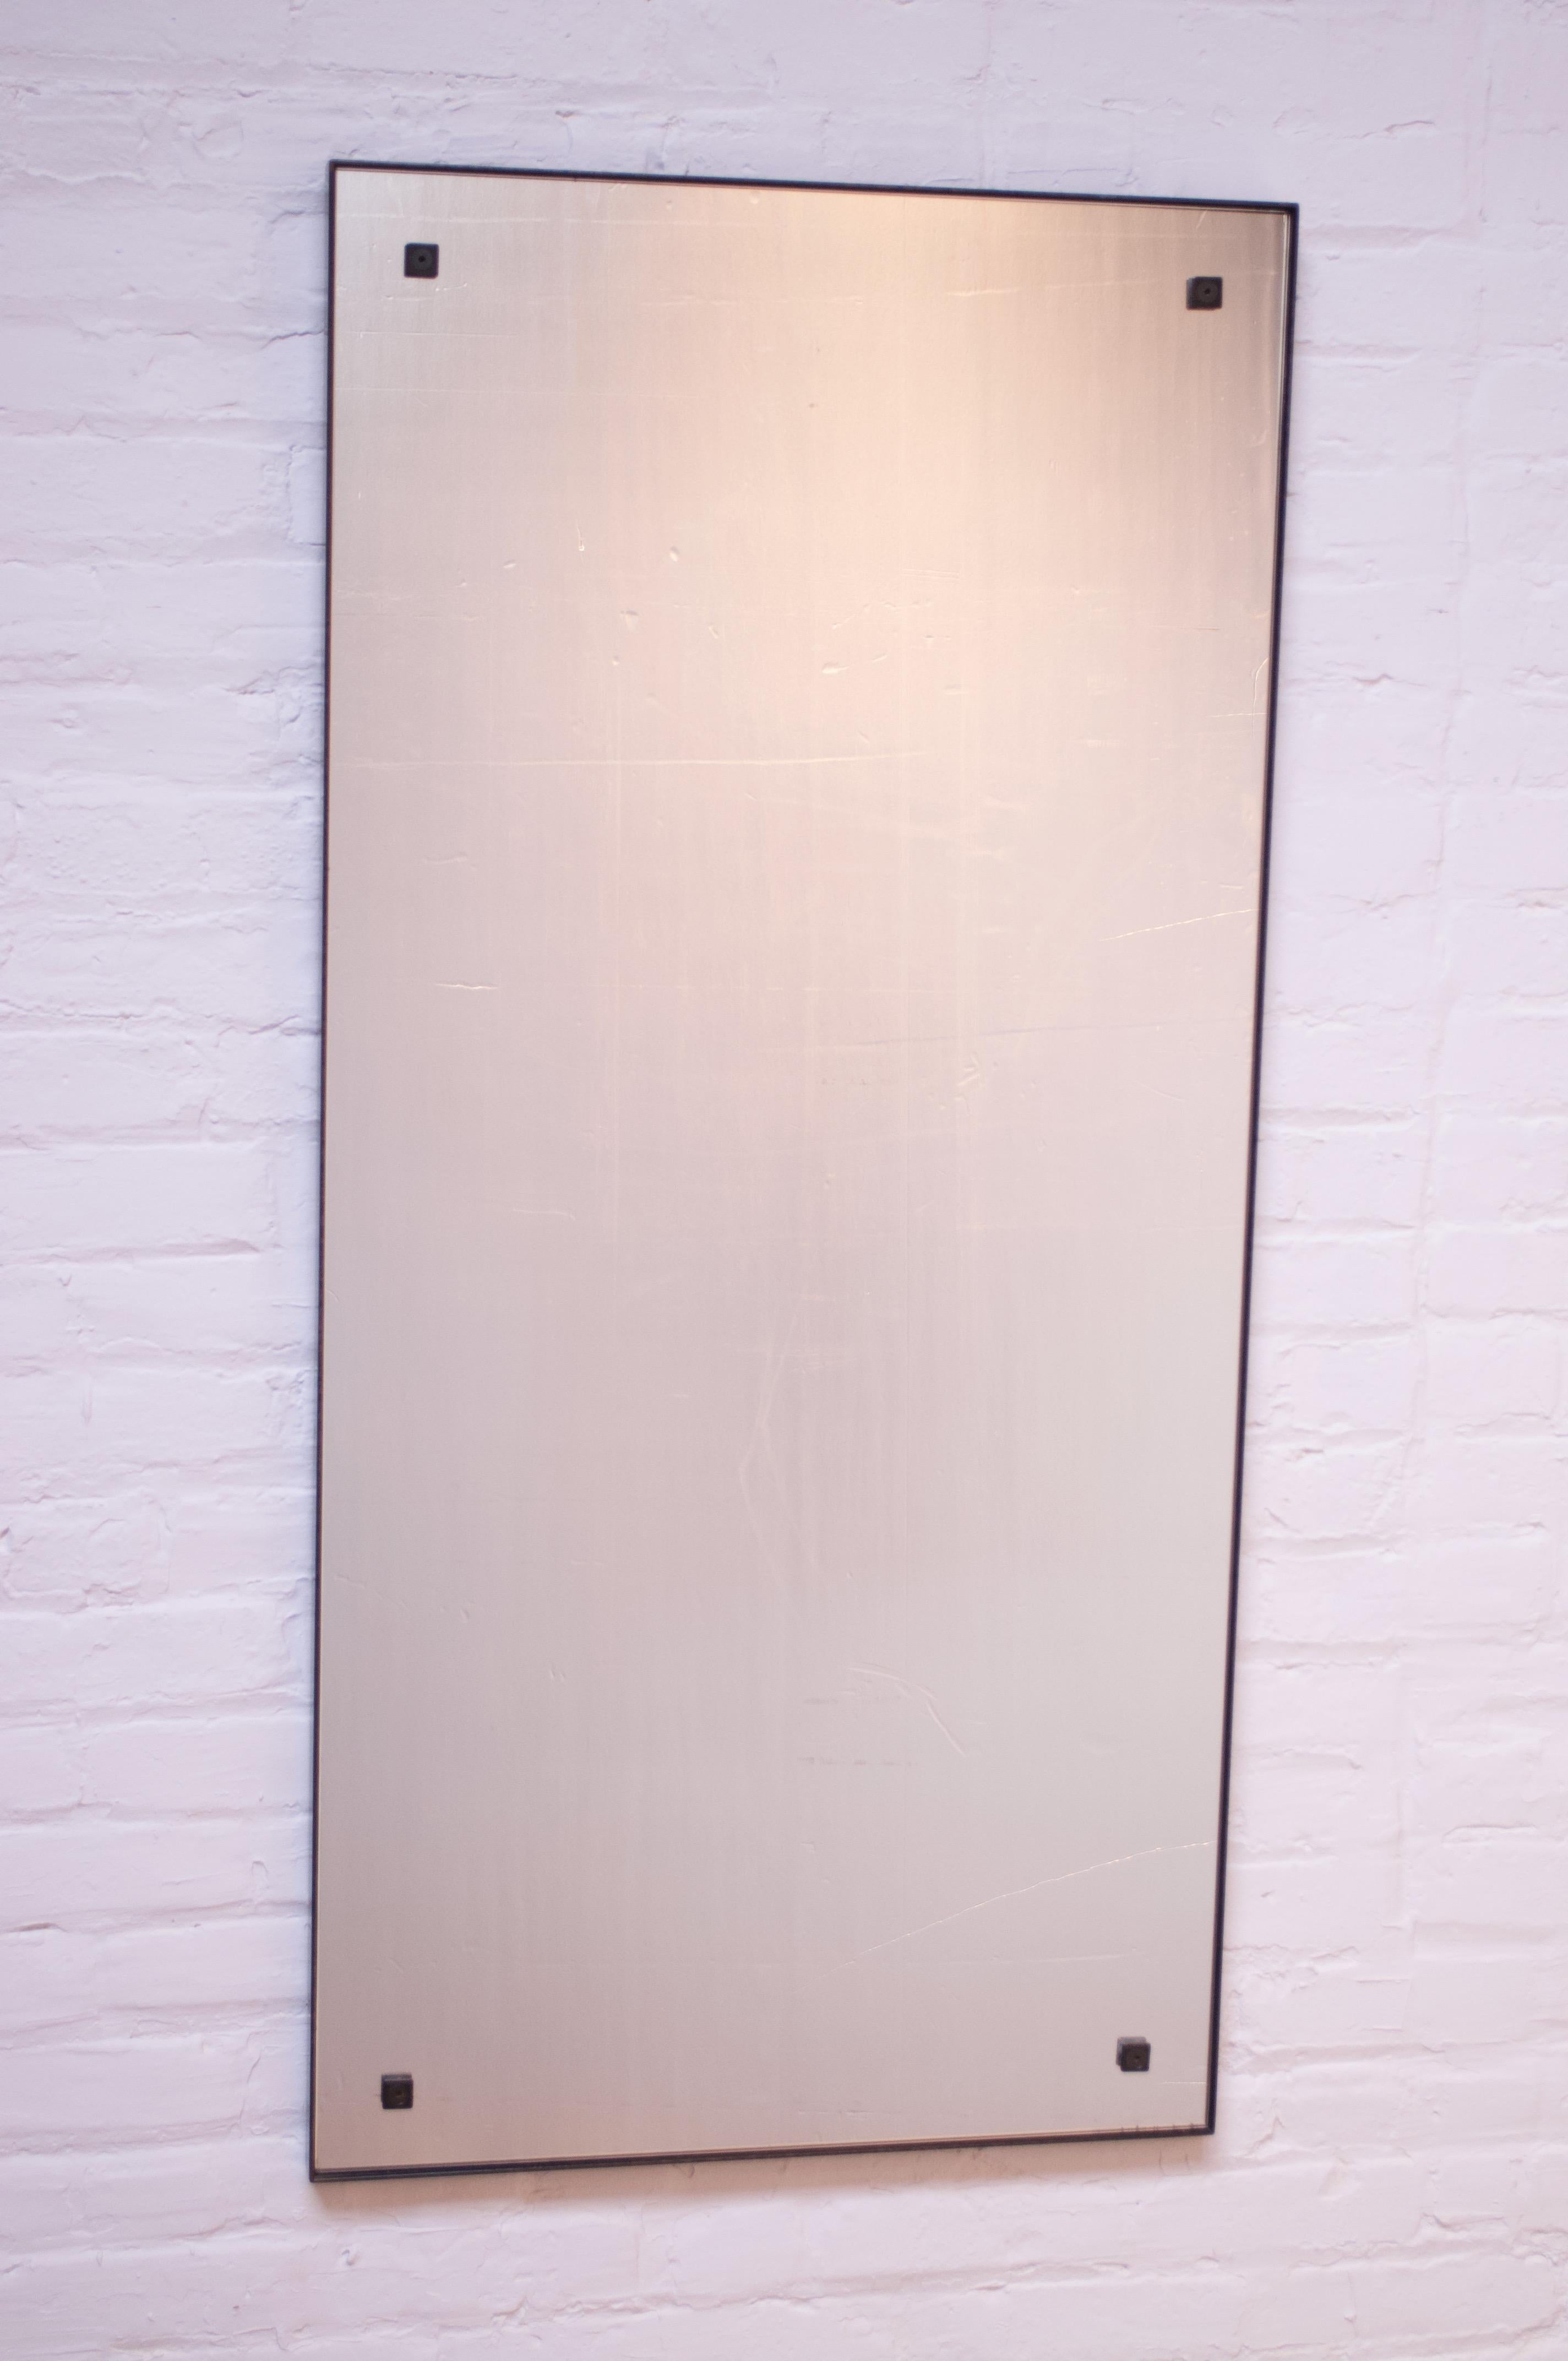 Contemporary custom made mirror designed and built by Brooklyn, NY Industrial designer and artist, Scott Behr (circa 2010). Measures: 48